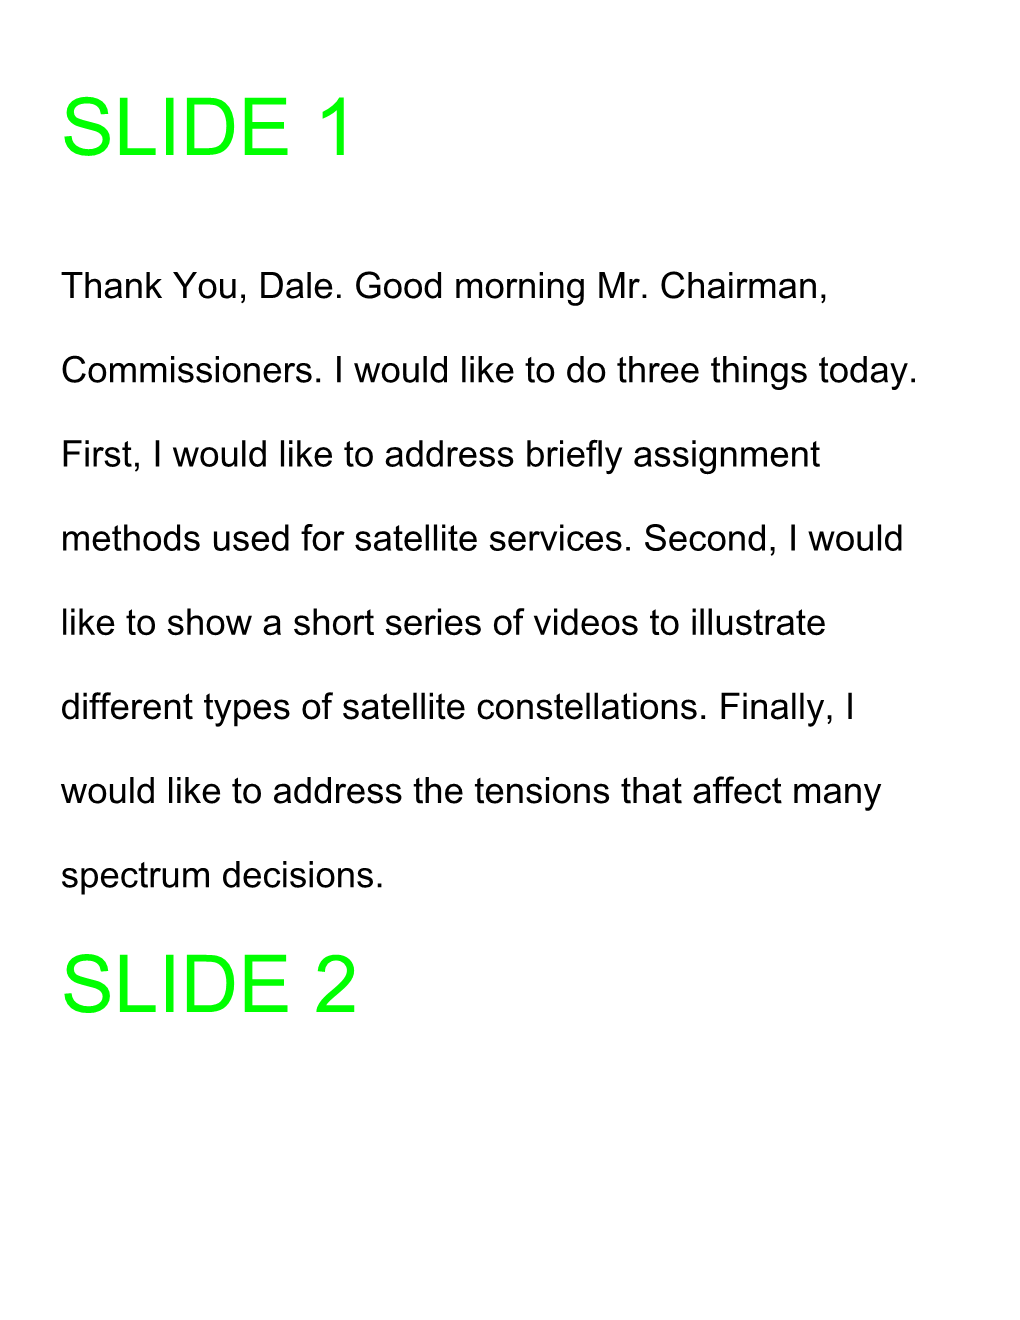 Thank You, Dale. Good Morning Mr. Chairman, Commissioners. I Would Like to Do Three Things